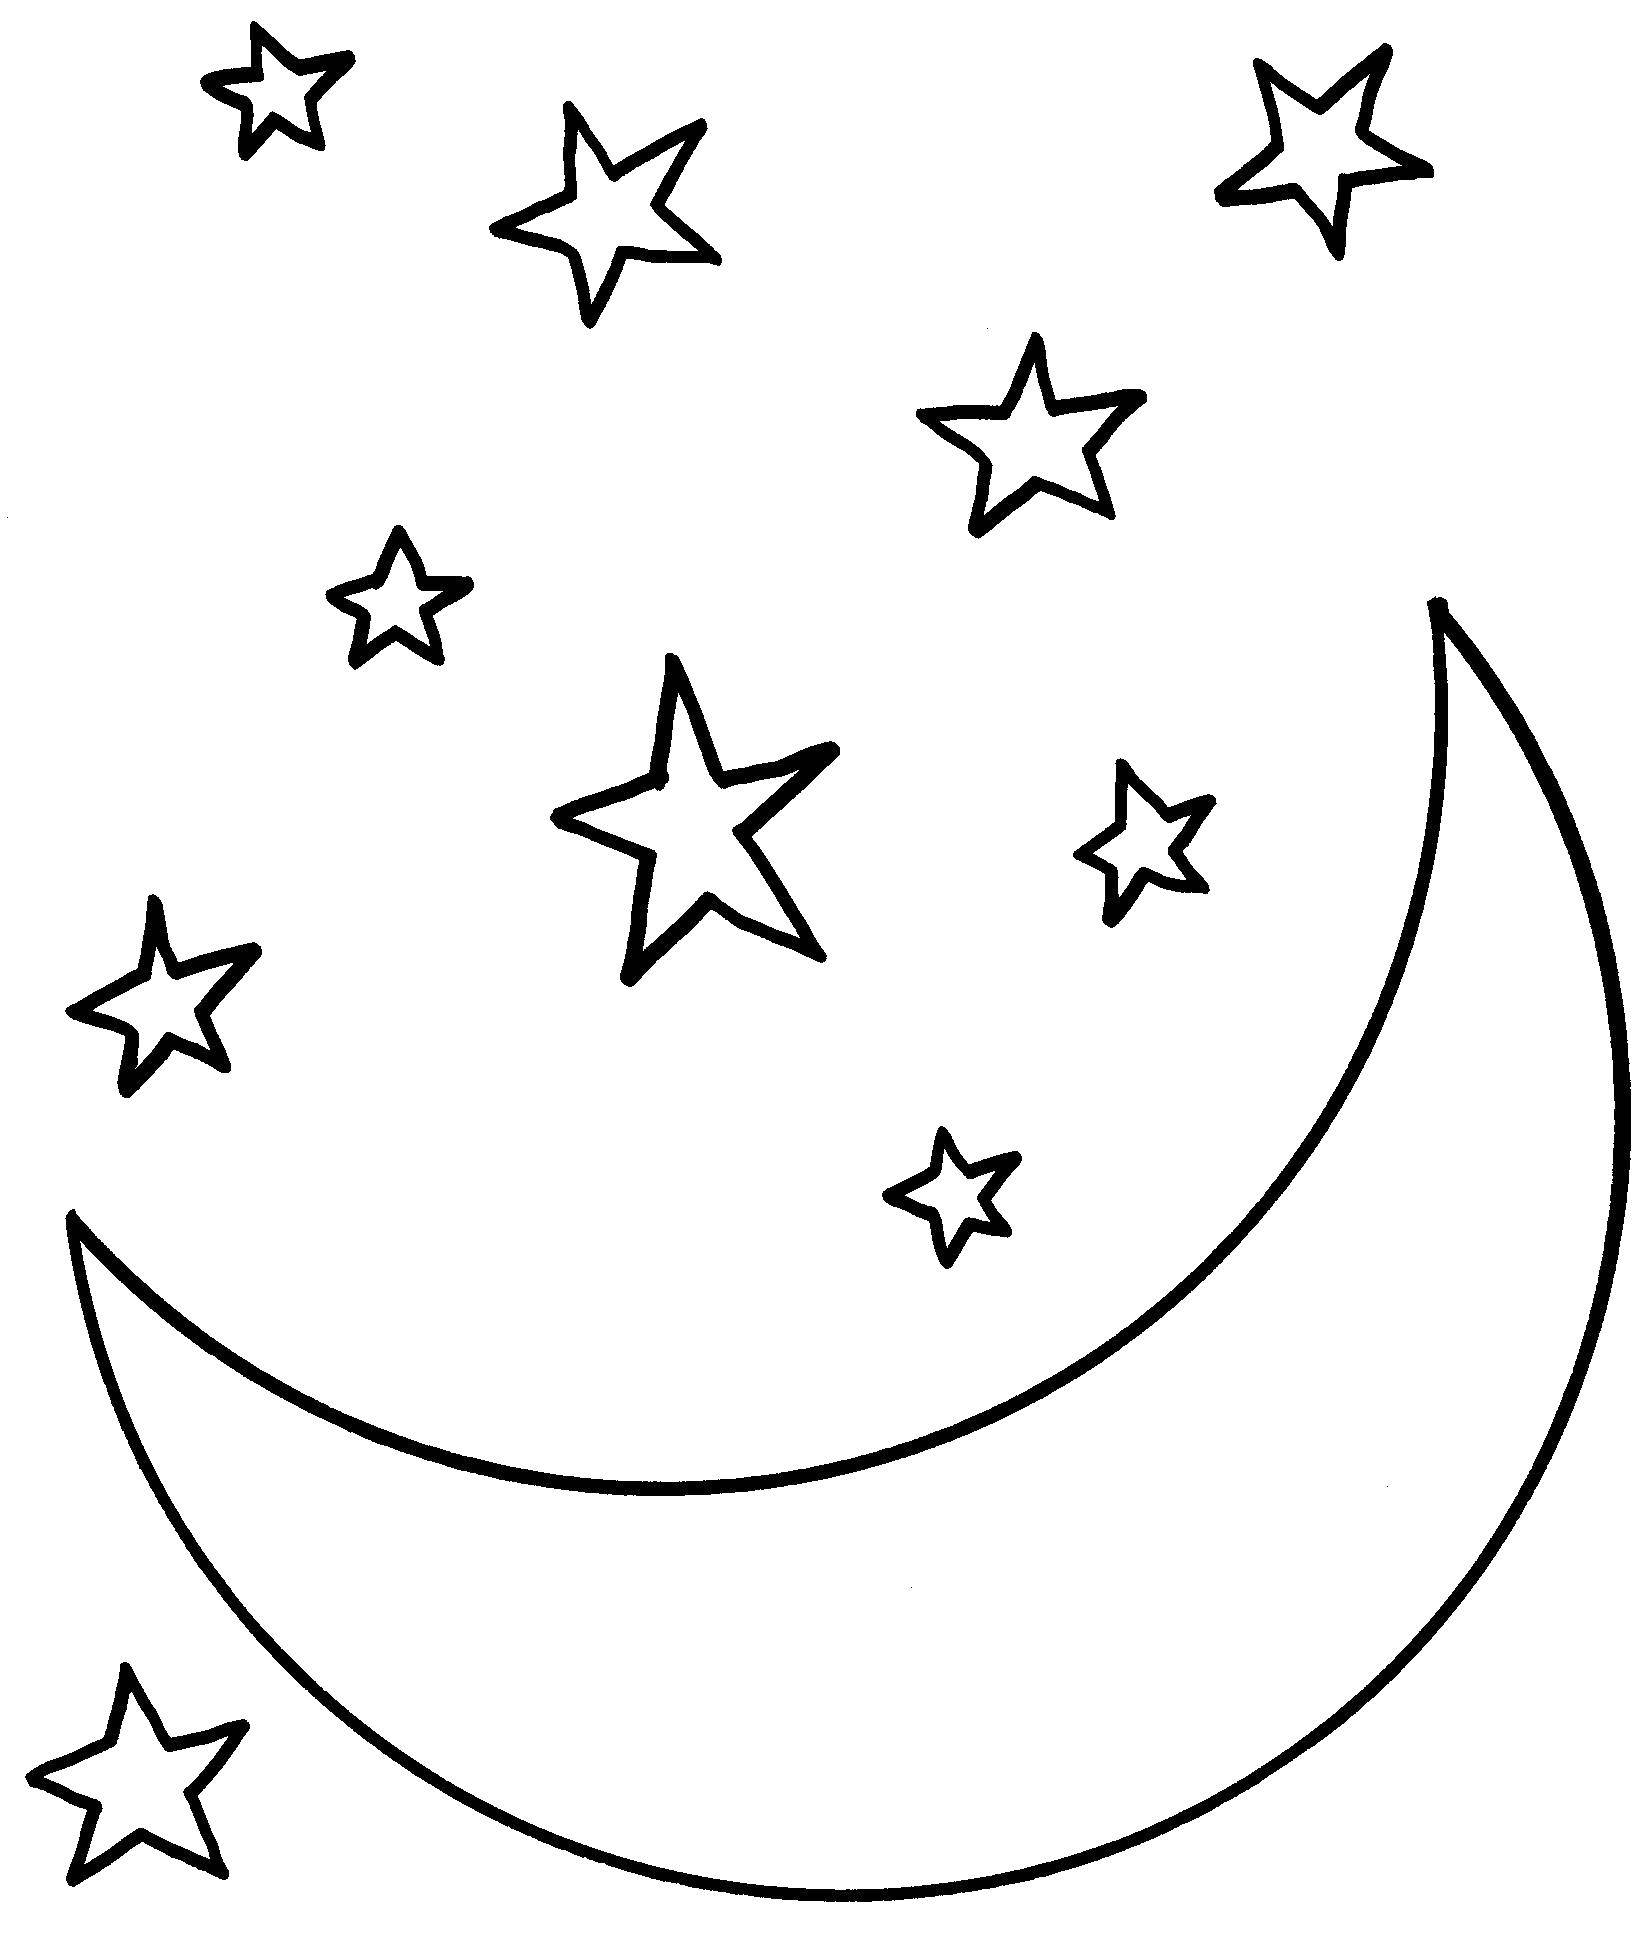 Coloring Crescent moon with stars. Category little ones. Tags:  Night, month, star.